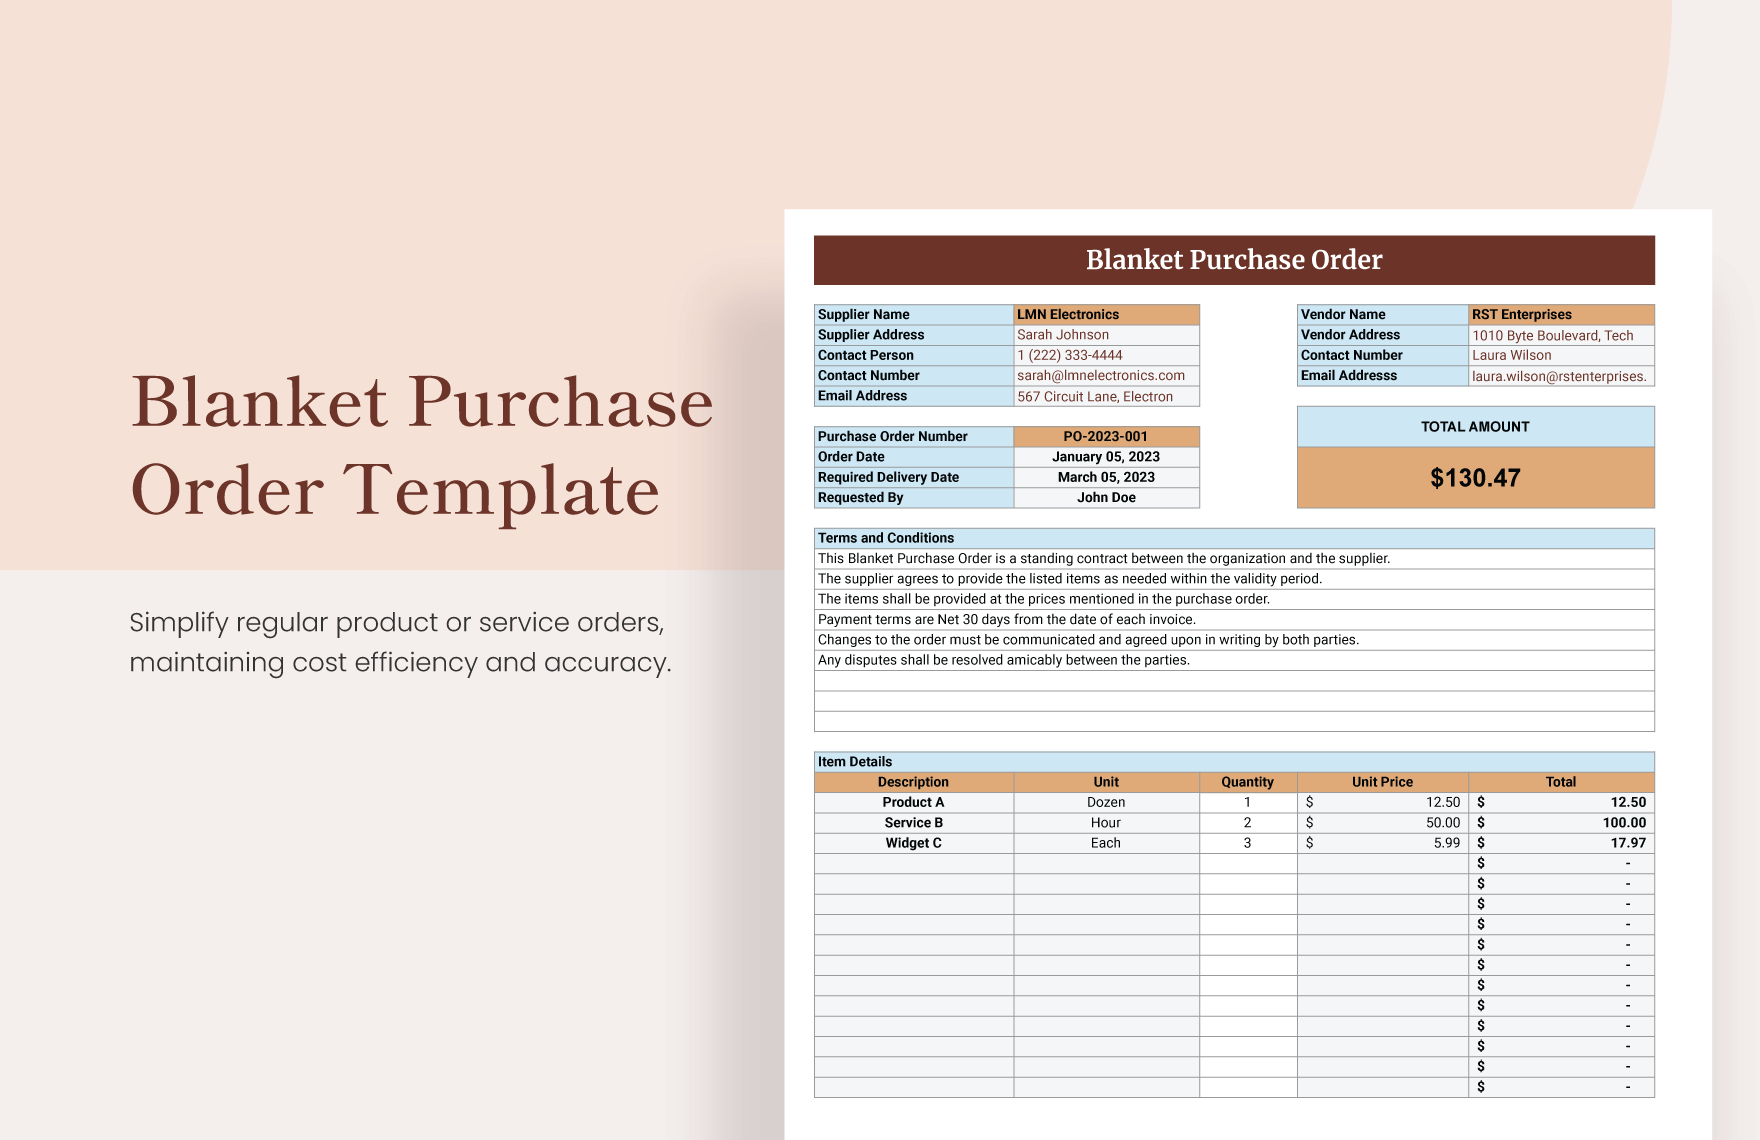 Blanket Purchase Order Template - Download in Excel, Google Sheets ...